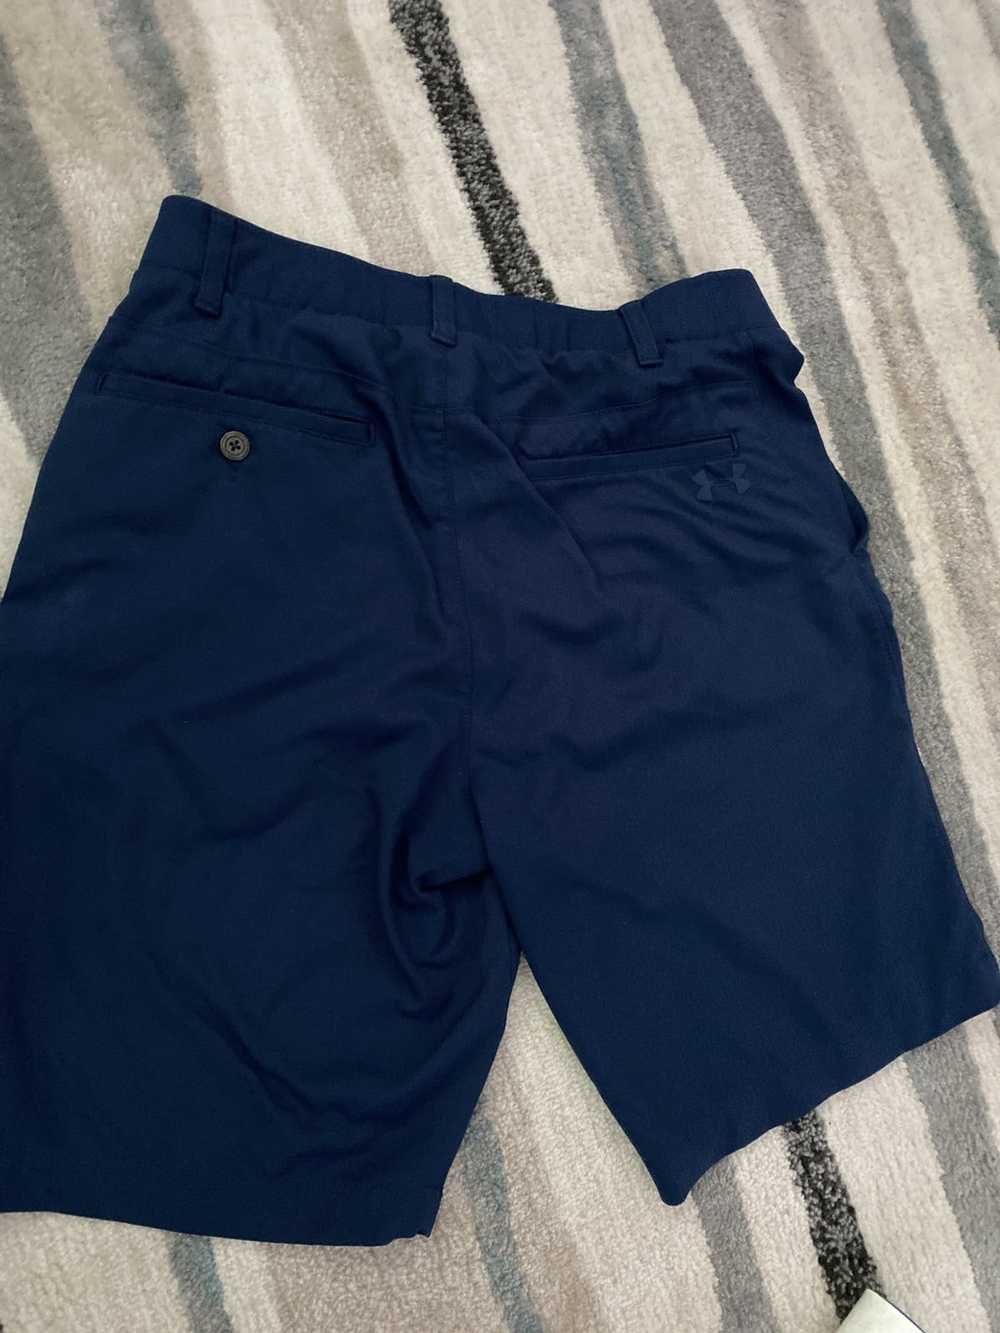 Under Armour Under Armour Dress Shorts Navy - image 2